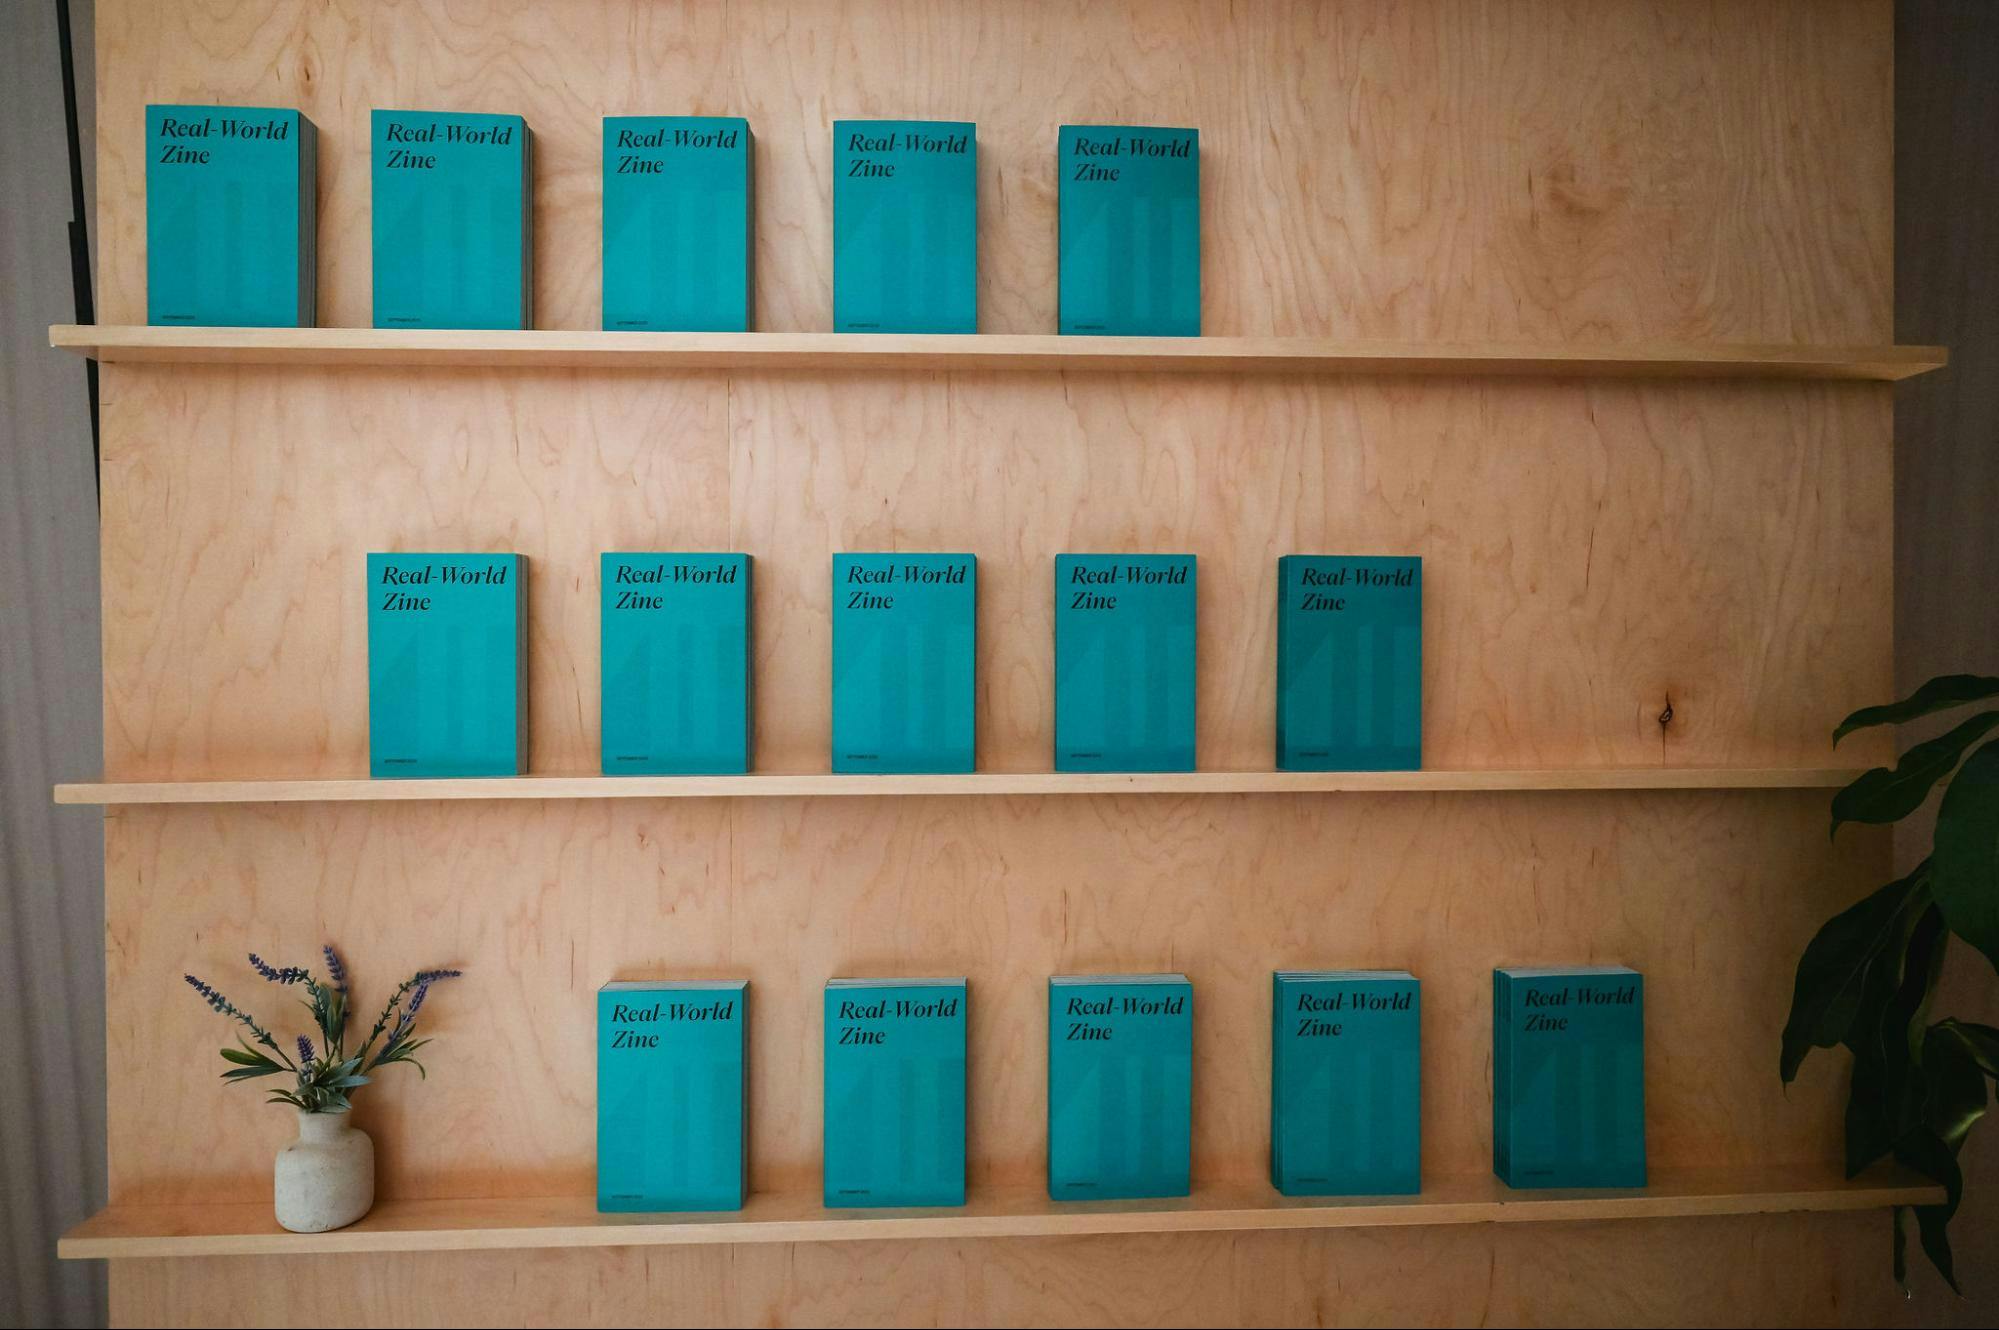 The Real-World Zine shelf at the Real-World Asset Summit 2023